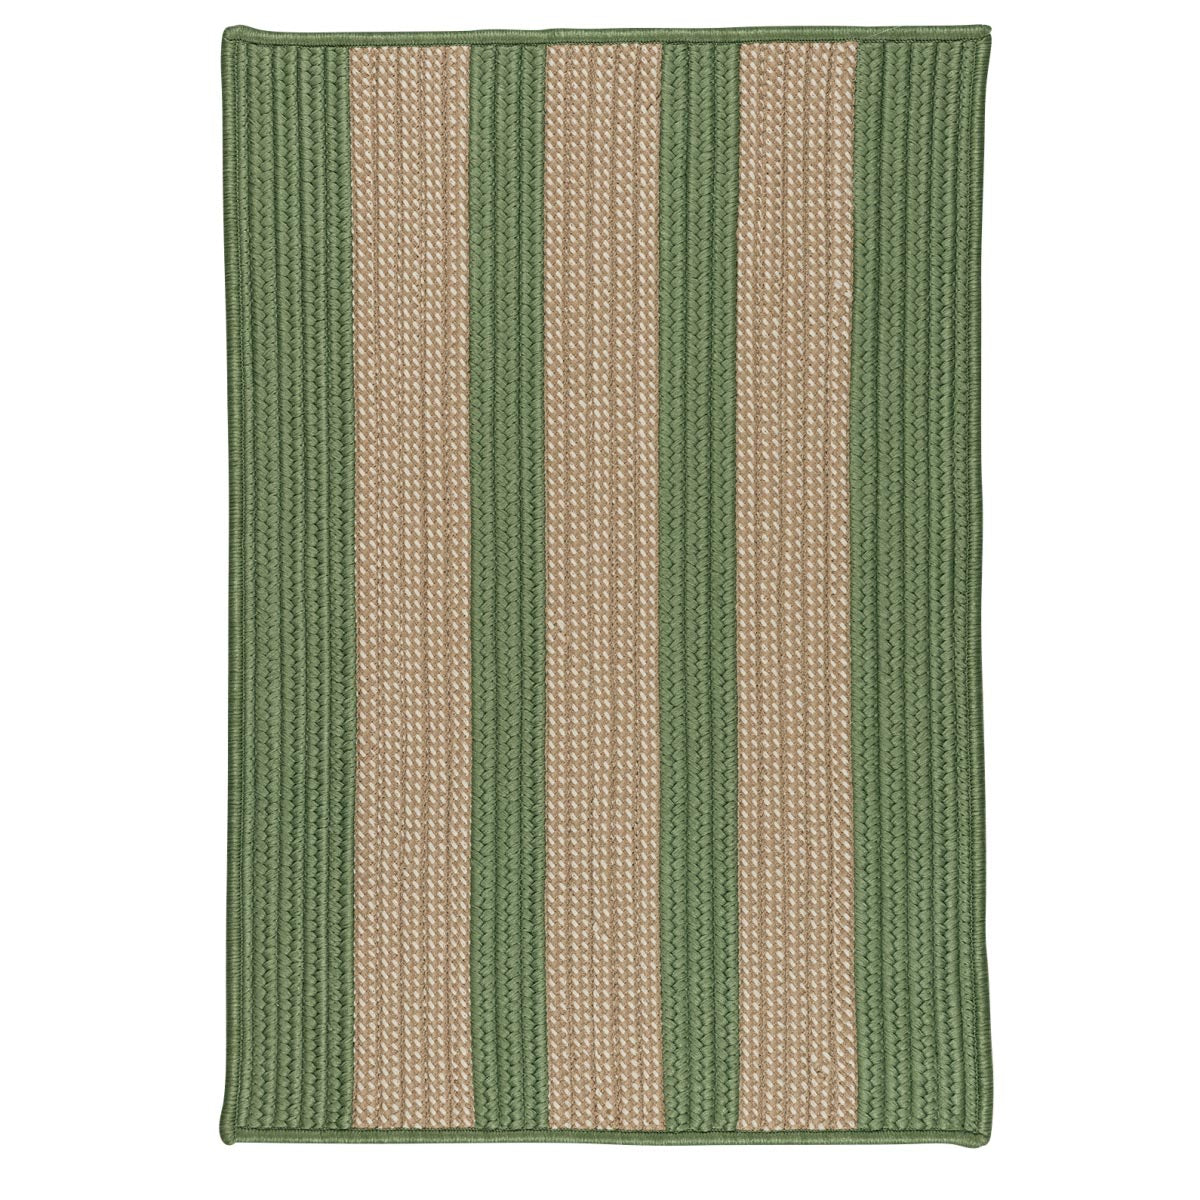 Boat House Olive Outdoor Braided Rectangular Rugs